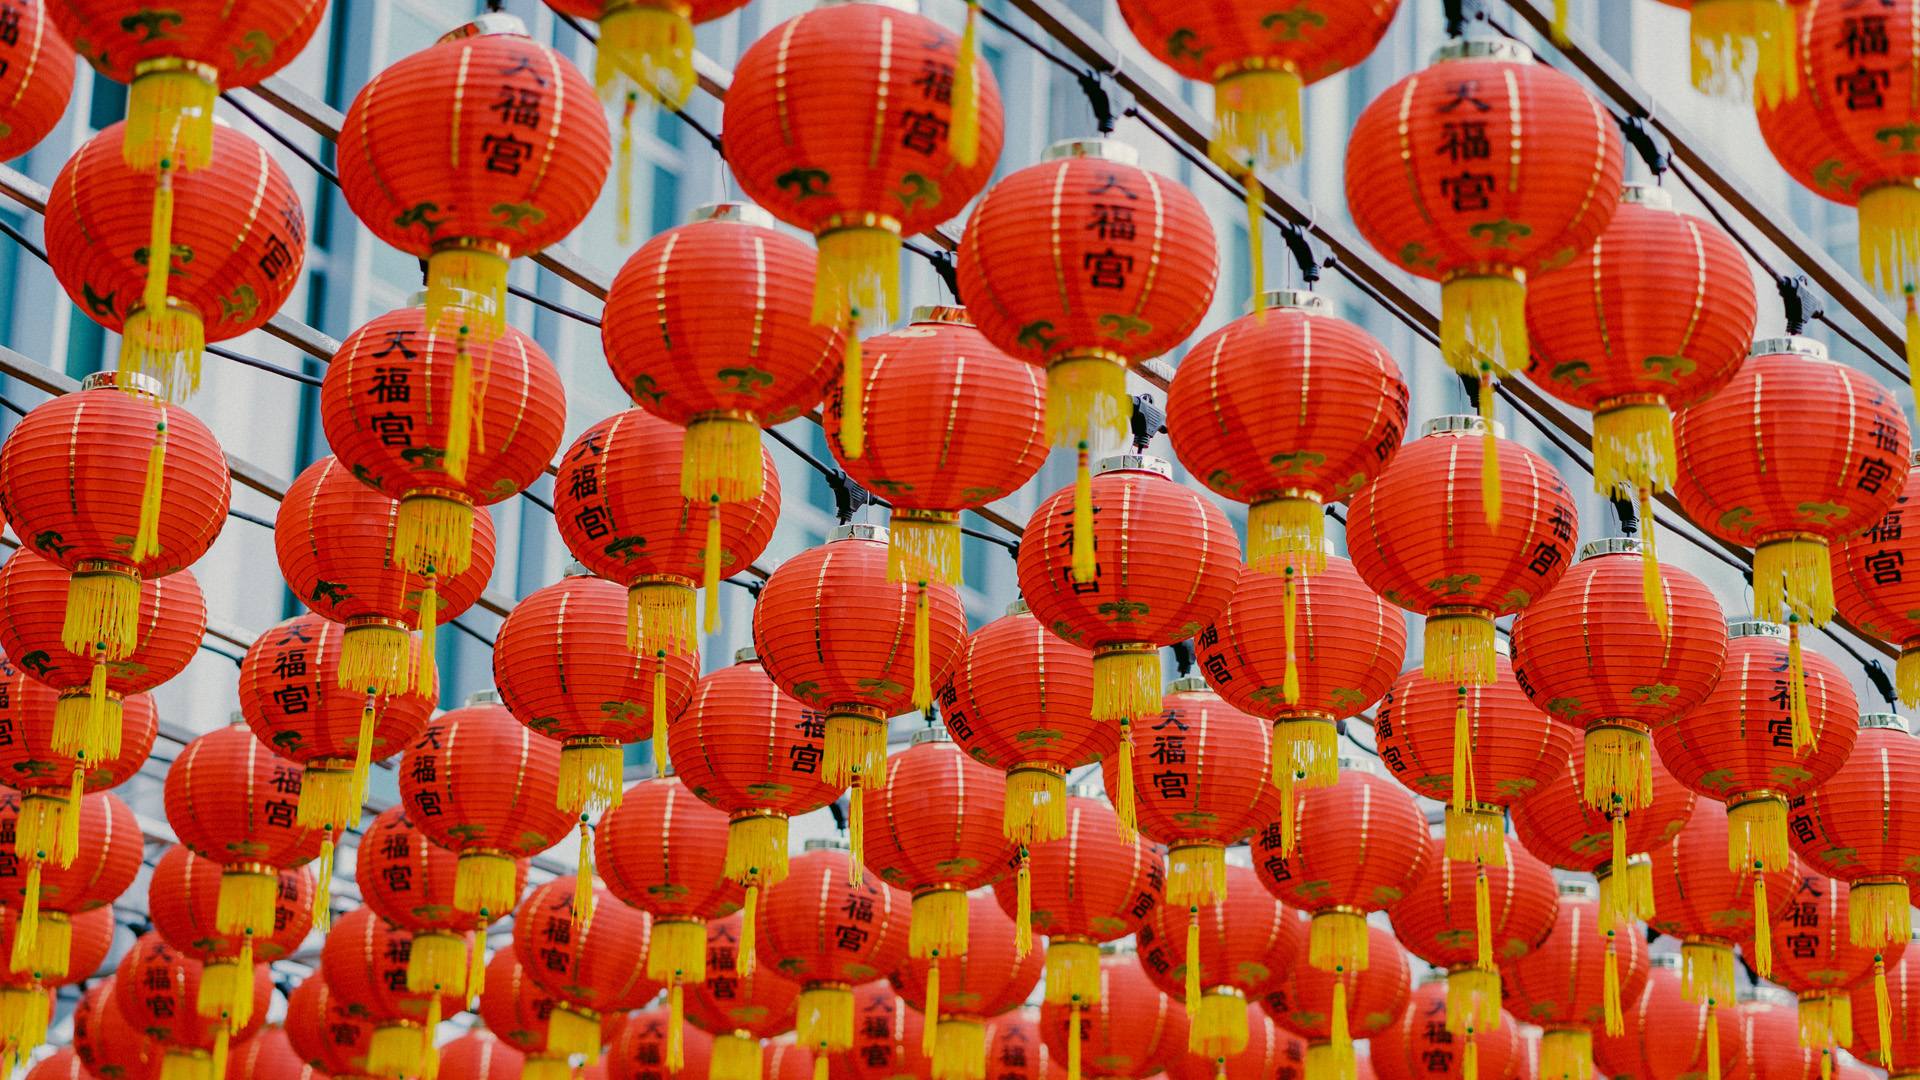 Rows of red Chinese new year lanterns